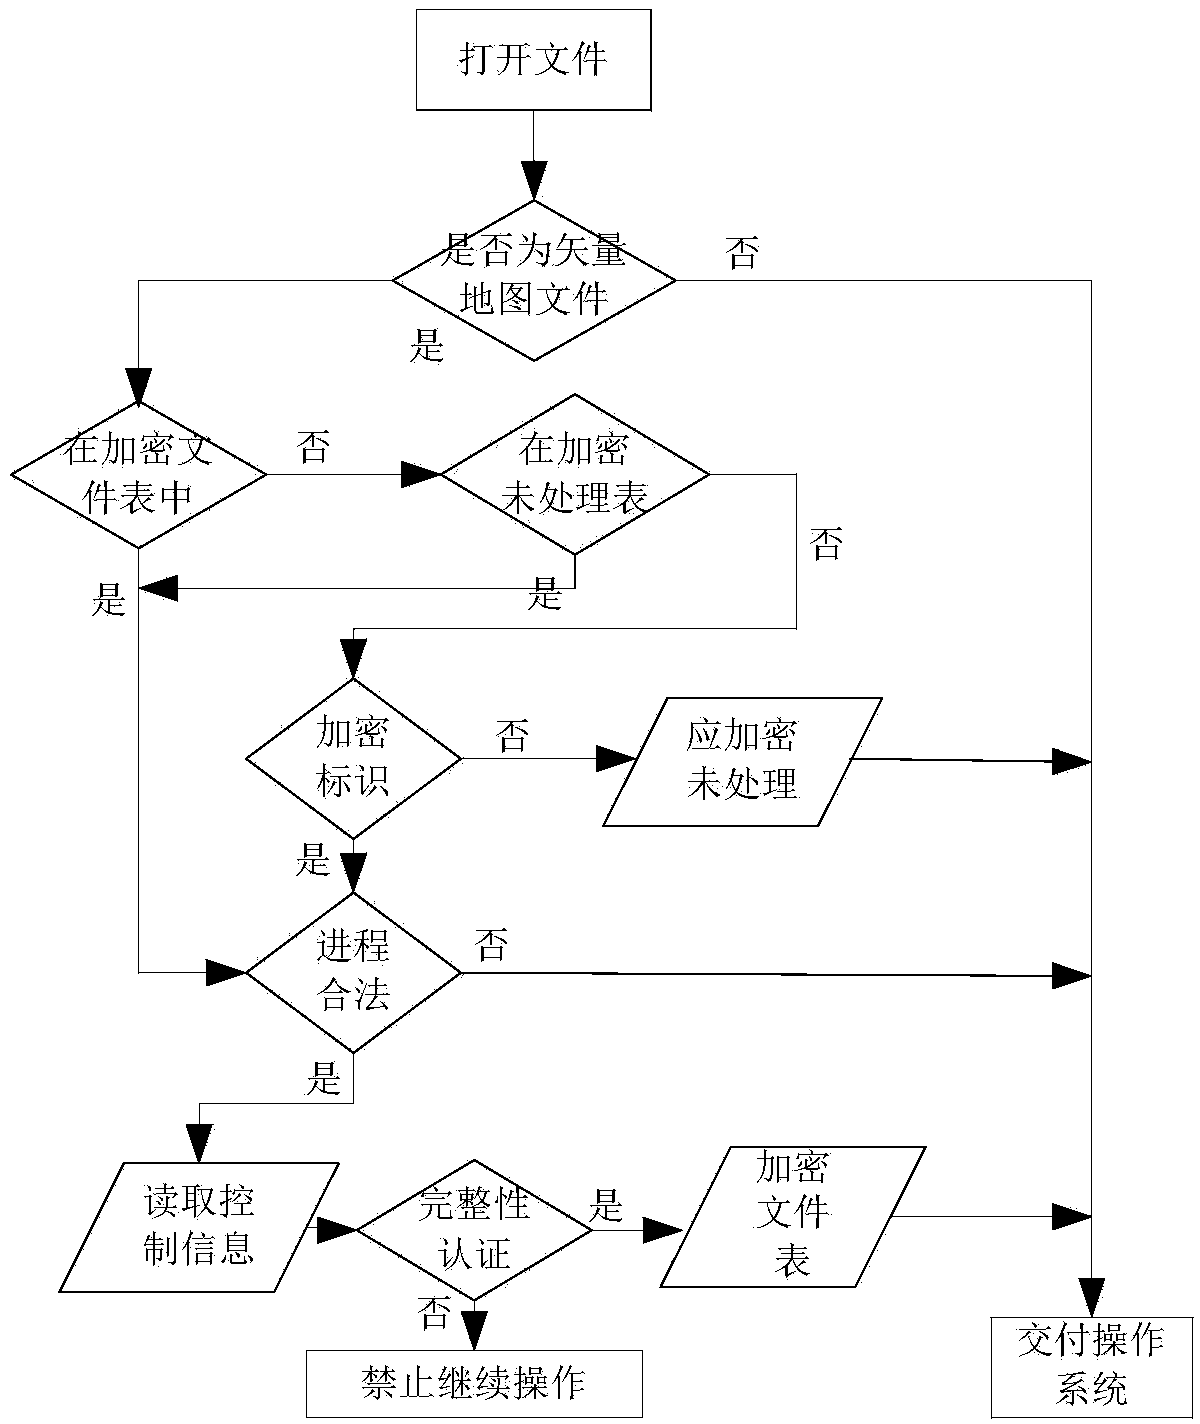 Vector map data protection and access control method based on file filter driver